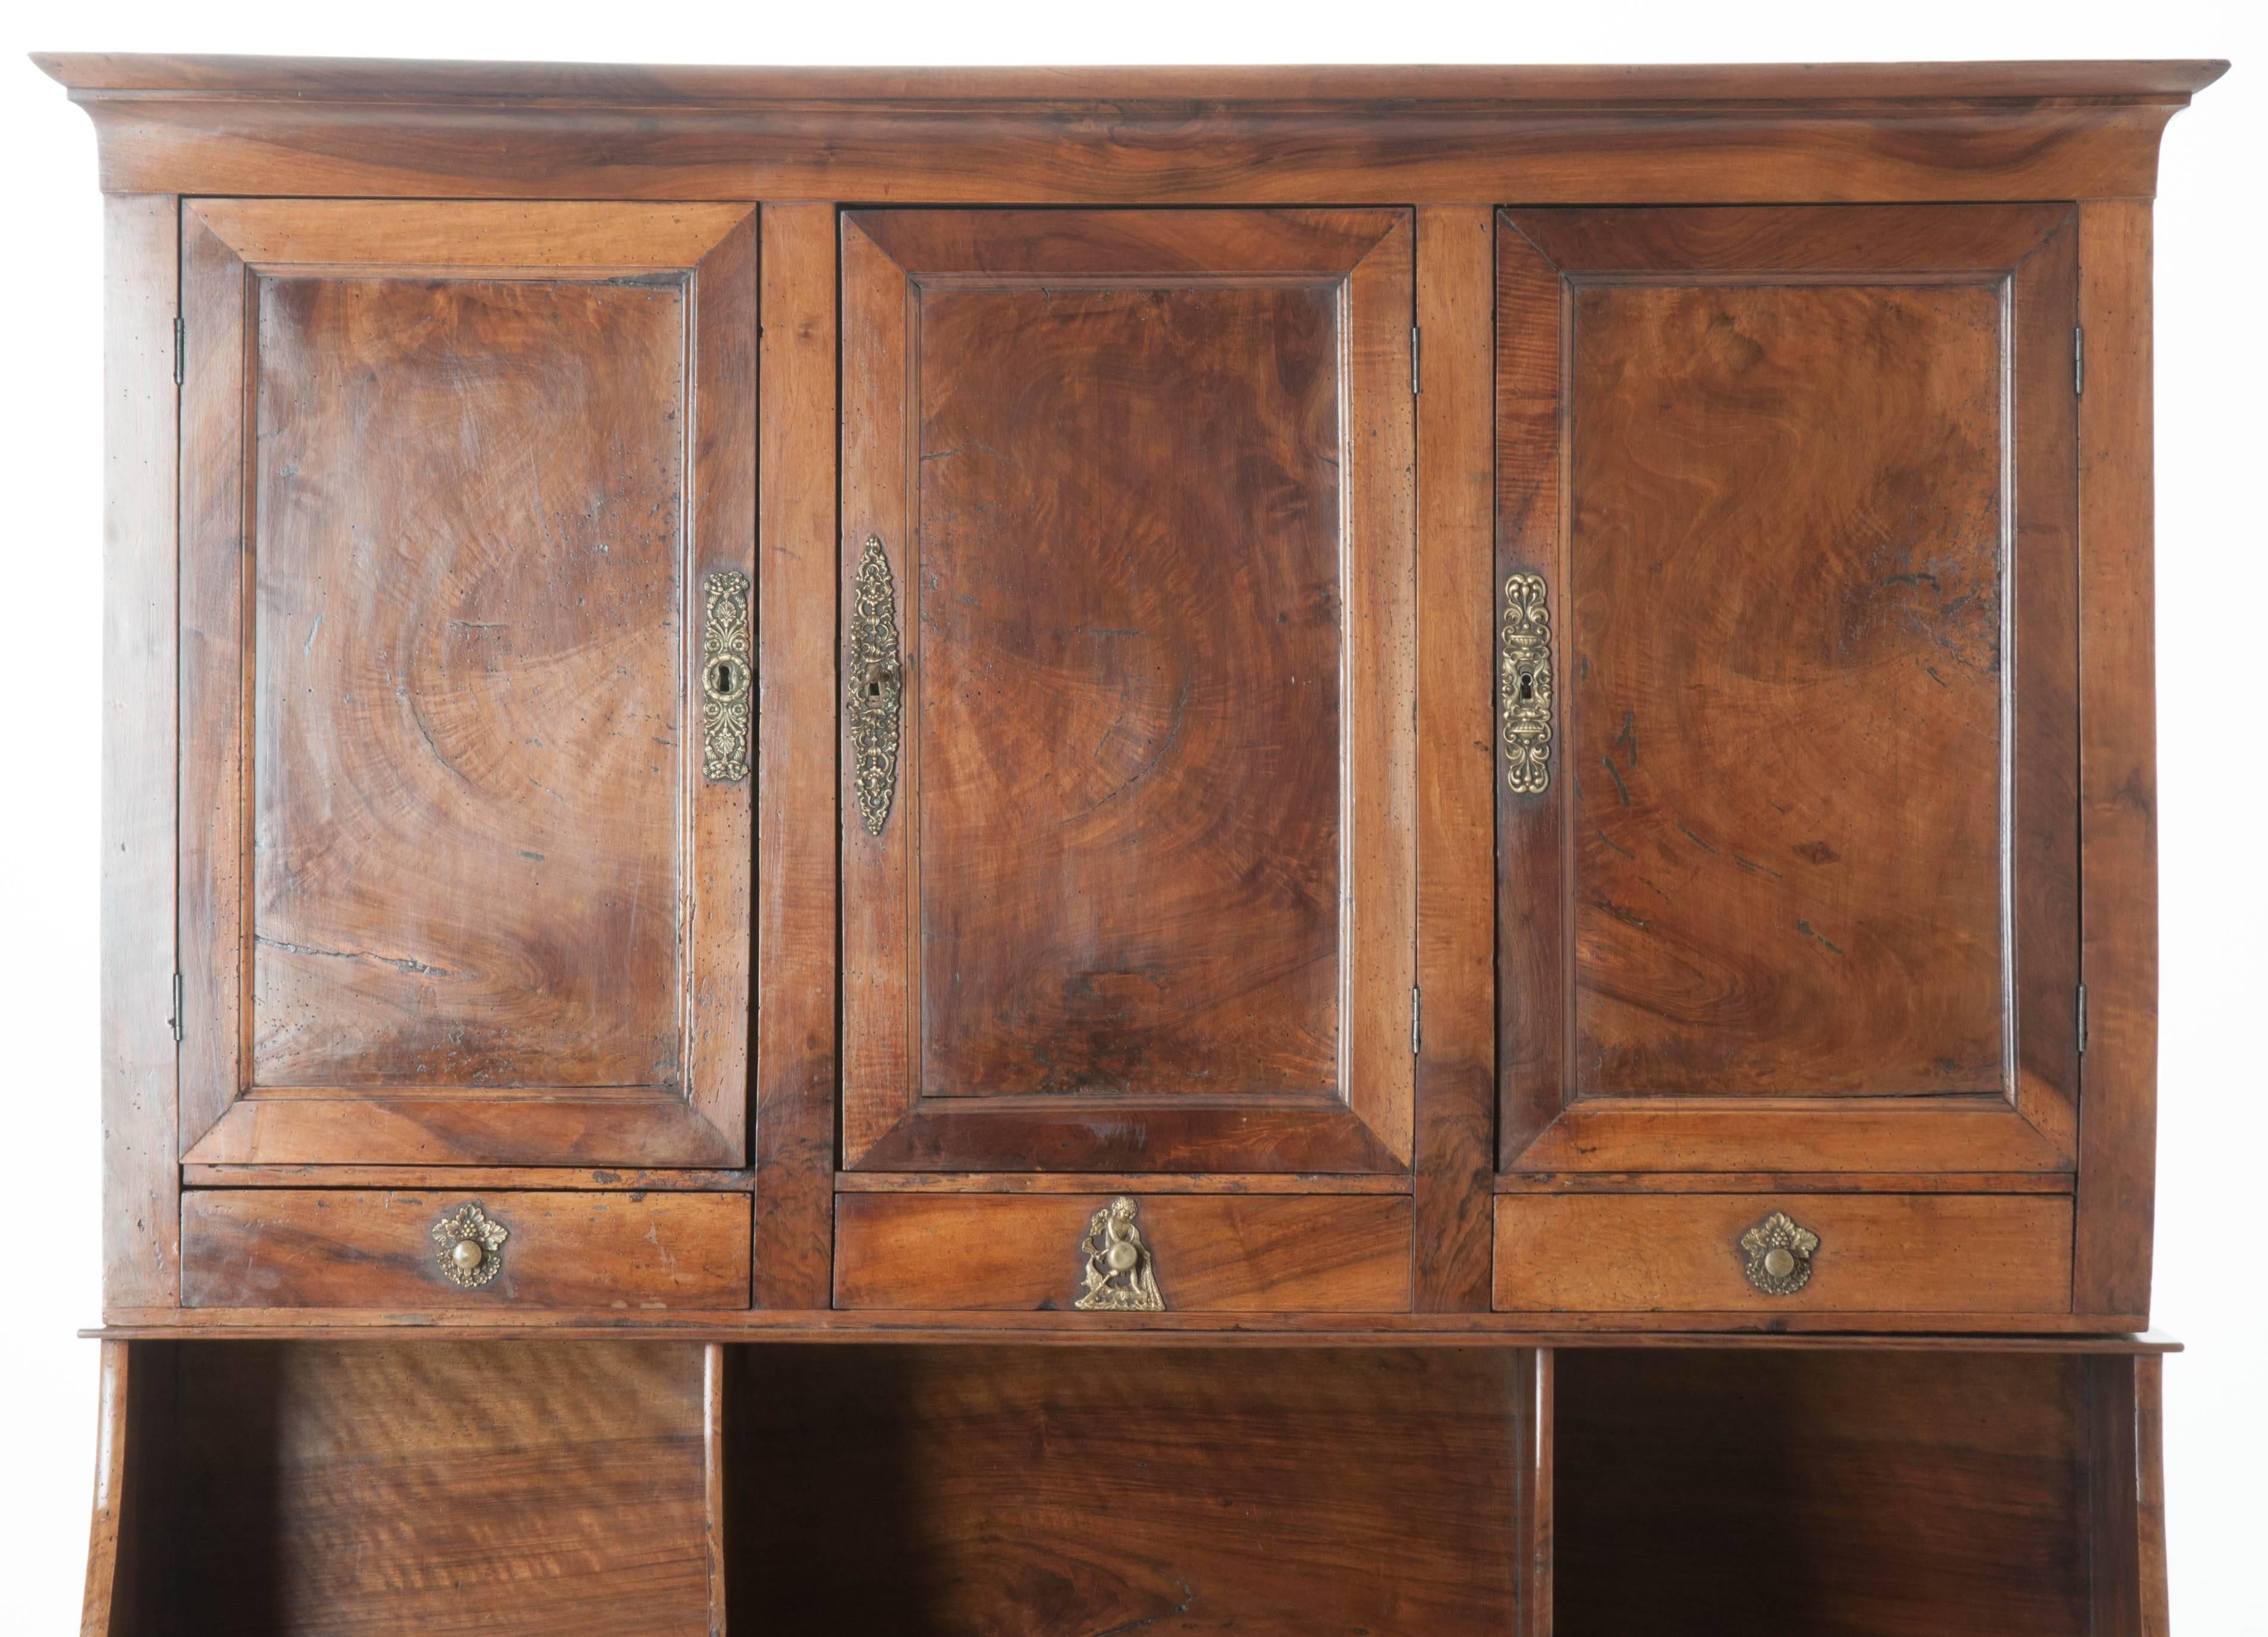 An extraordinarily handsome French Empire walnut secretary made in the middle of the 19th century in France. This exquisite piece boasts six drawers and five doors that provide ample storage for your writing essentials and other accessories. The